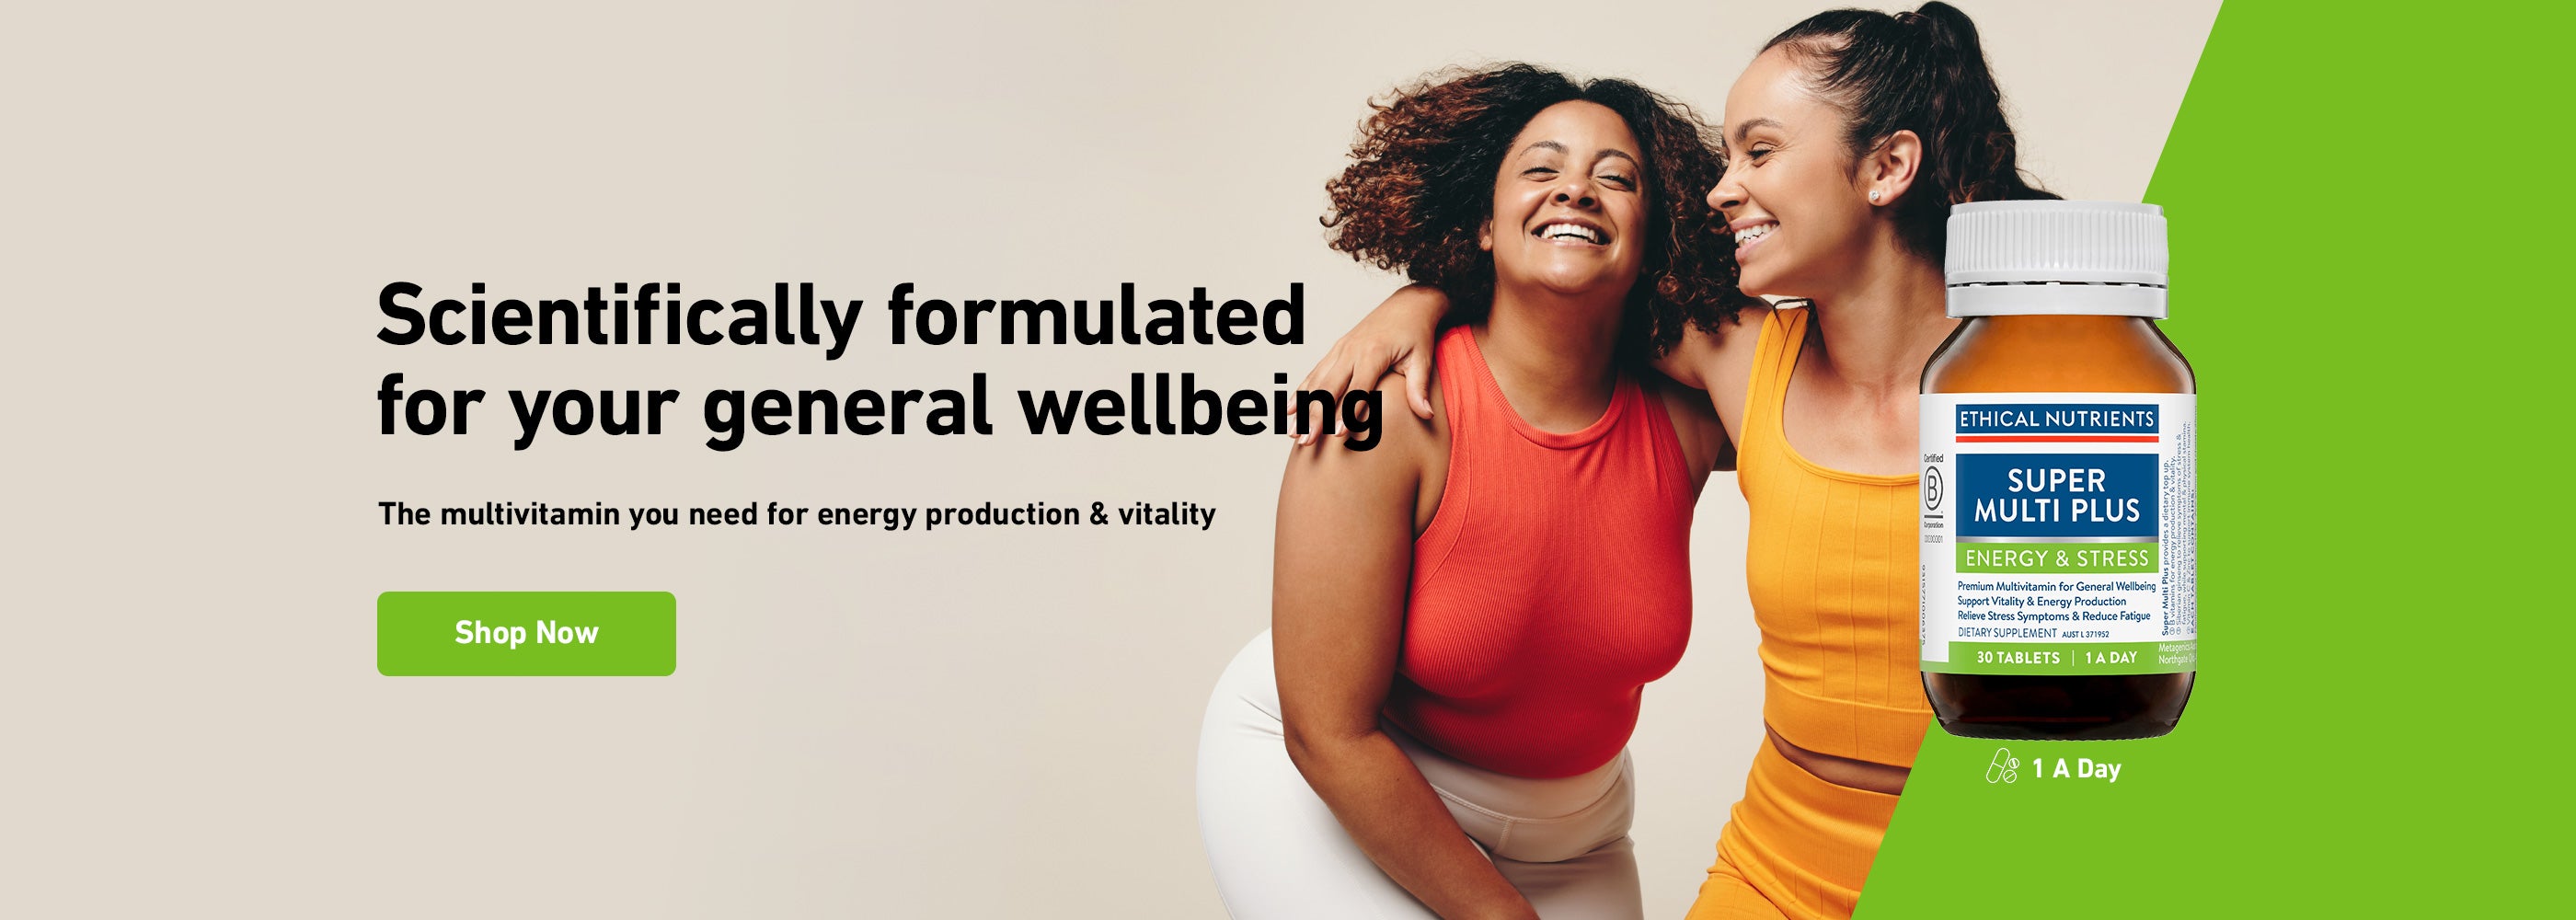 Scientifically formulated for your general wellbeing | Super Multi Plus | Shop Now